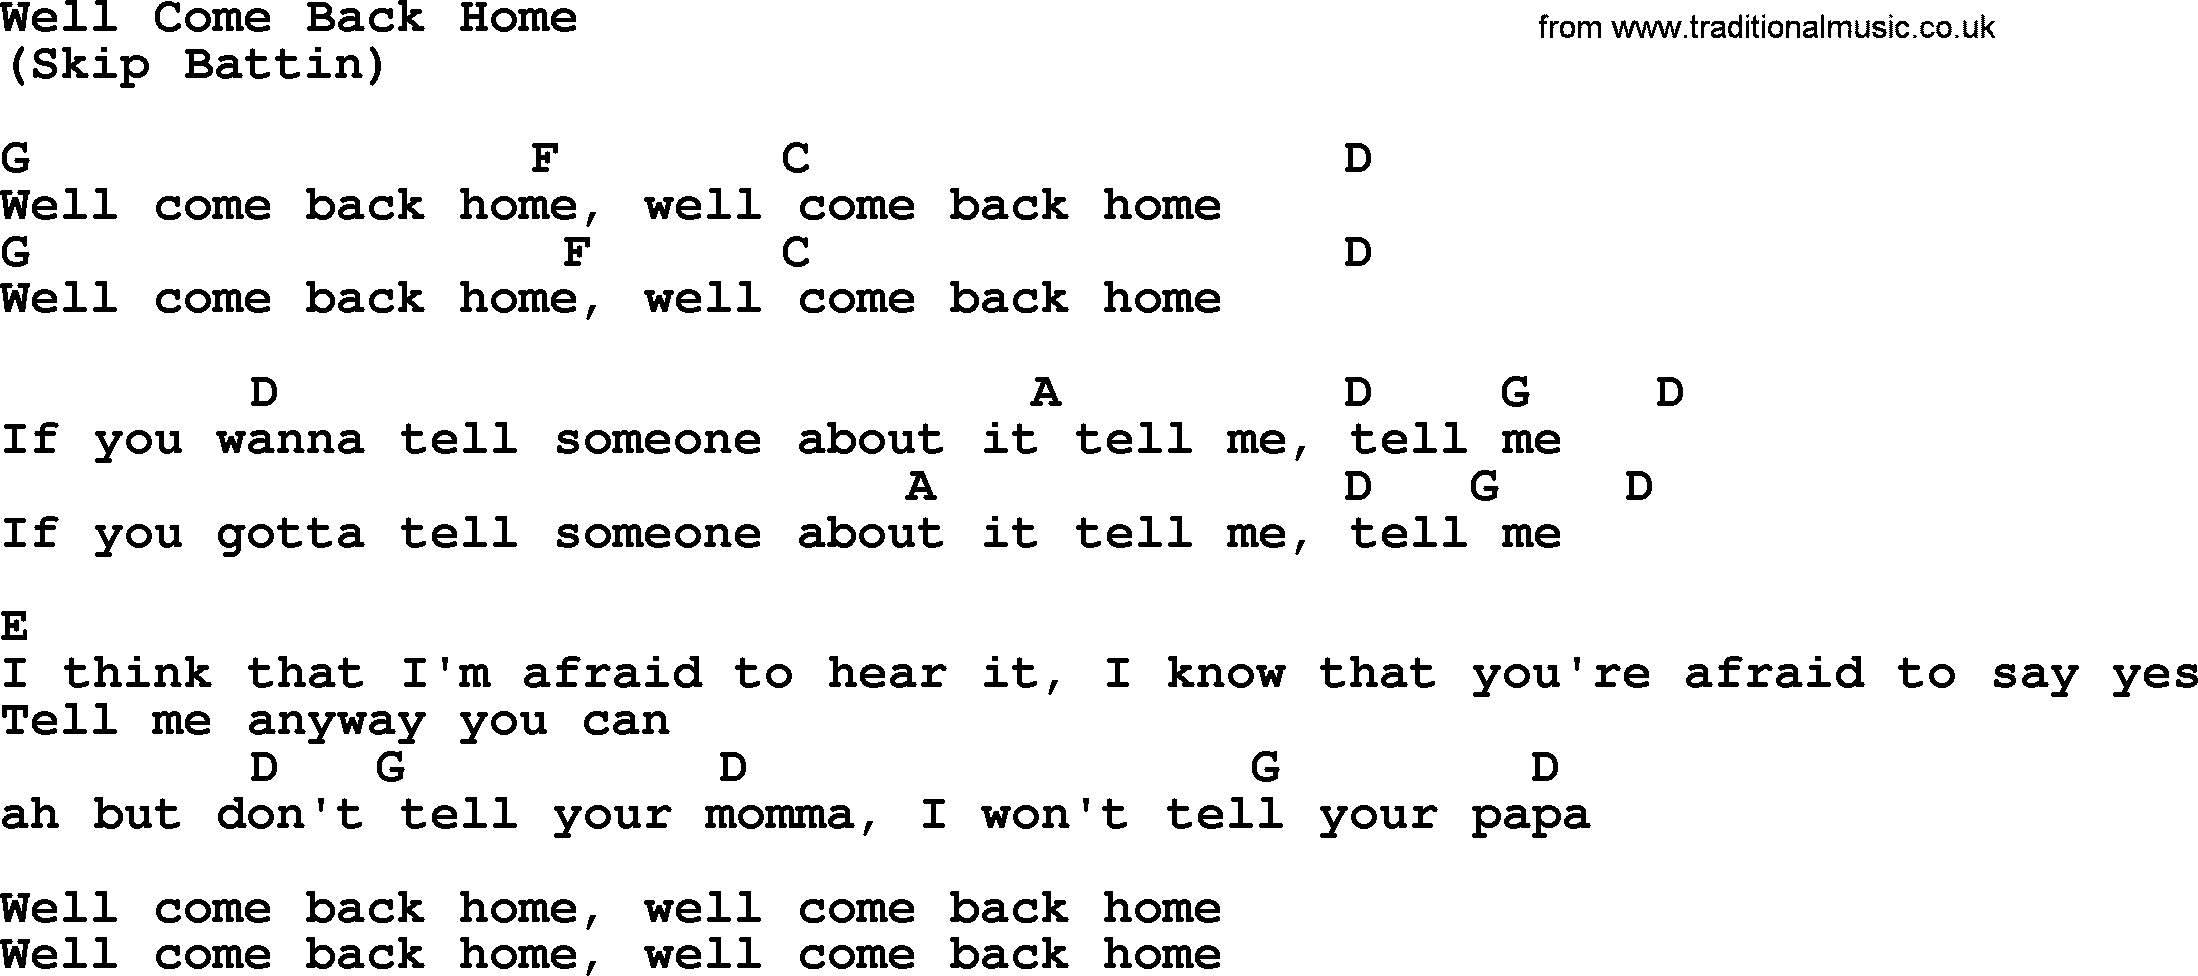 The Byrds song Well Come Back Home, lyrics and chords